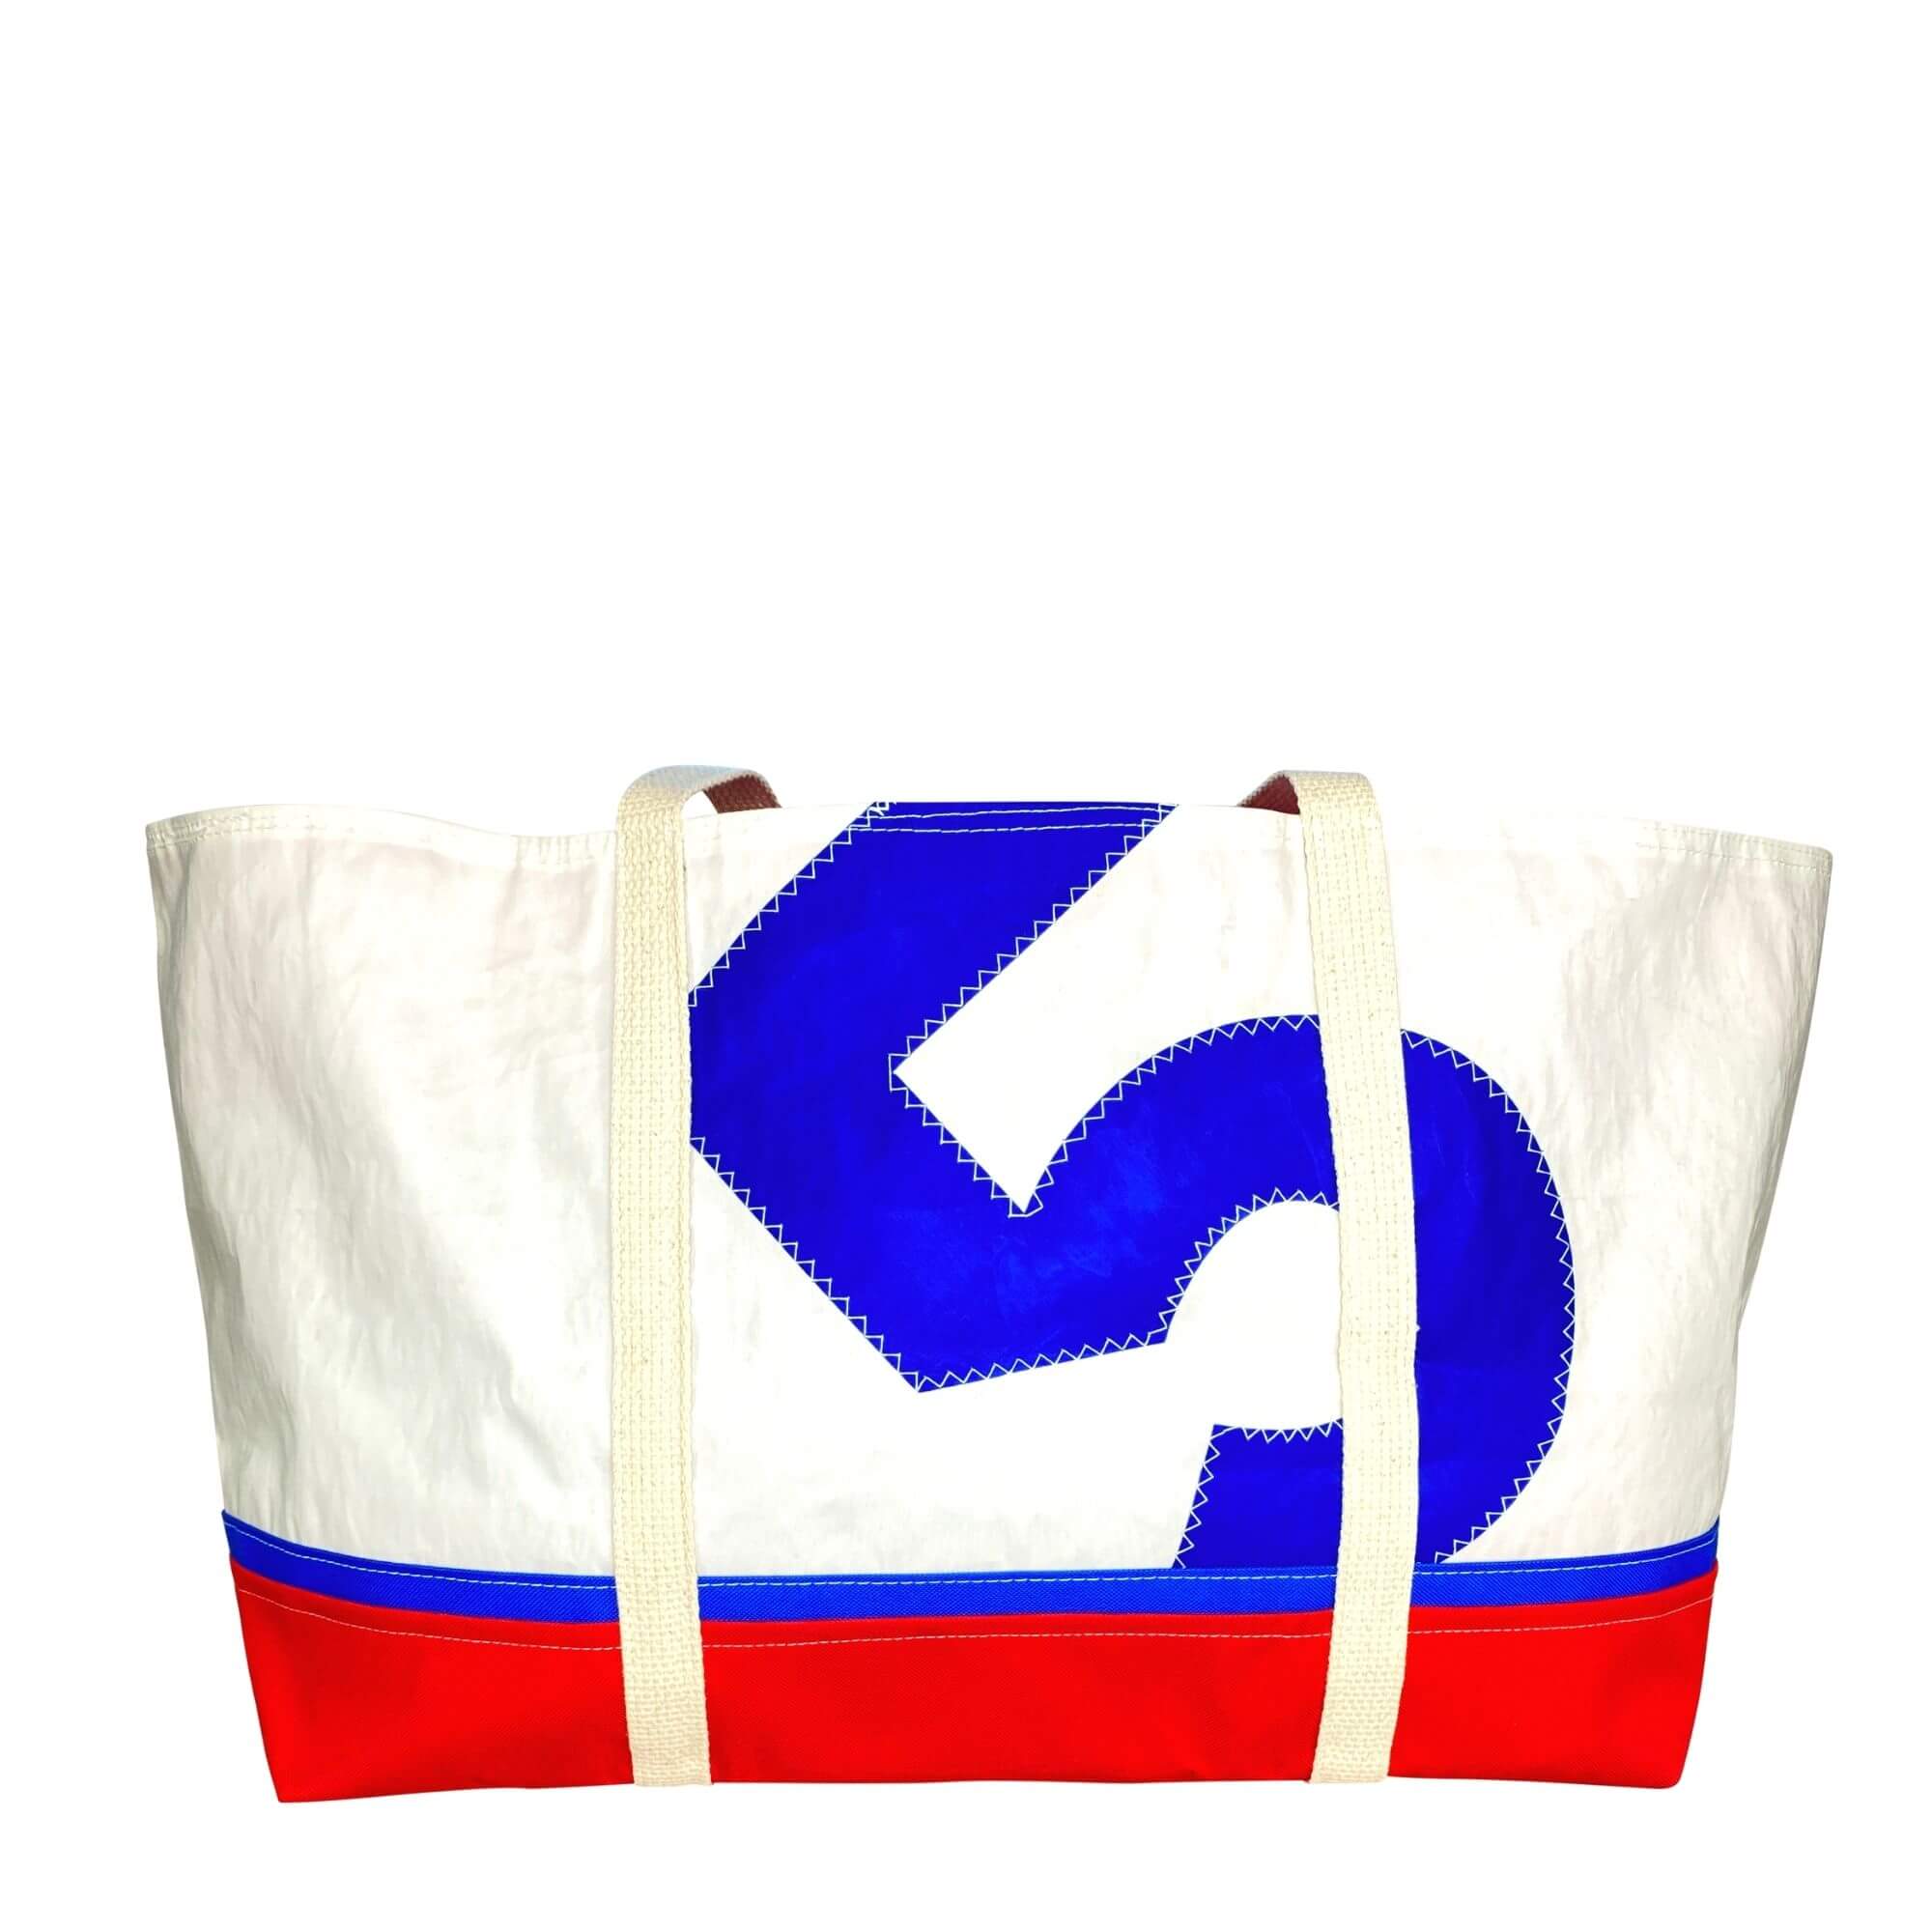 Recycled Sail Bag, Tote Bag Handmade from Sails, Blue & Red – New